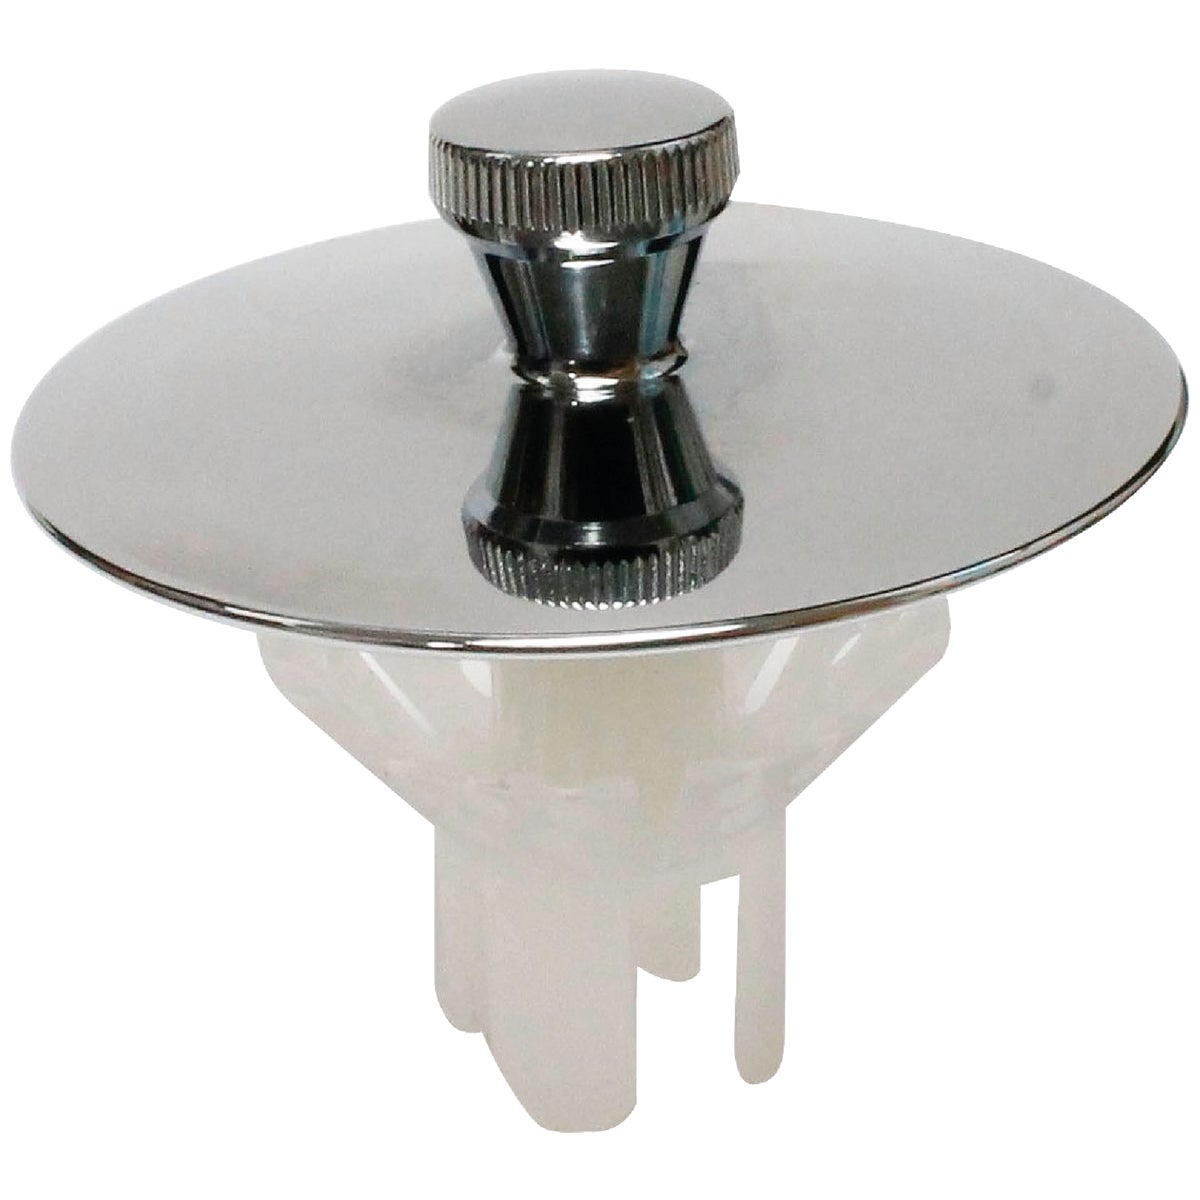 Keeney Quick-N-Easy Bathtub Drain Stopper with Polished Chrome Finish